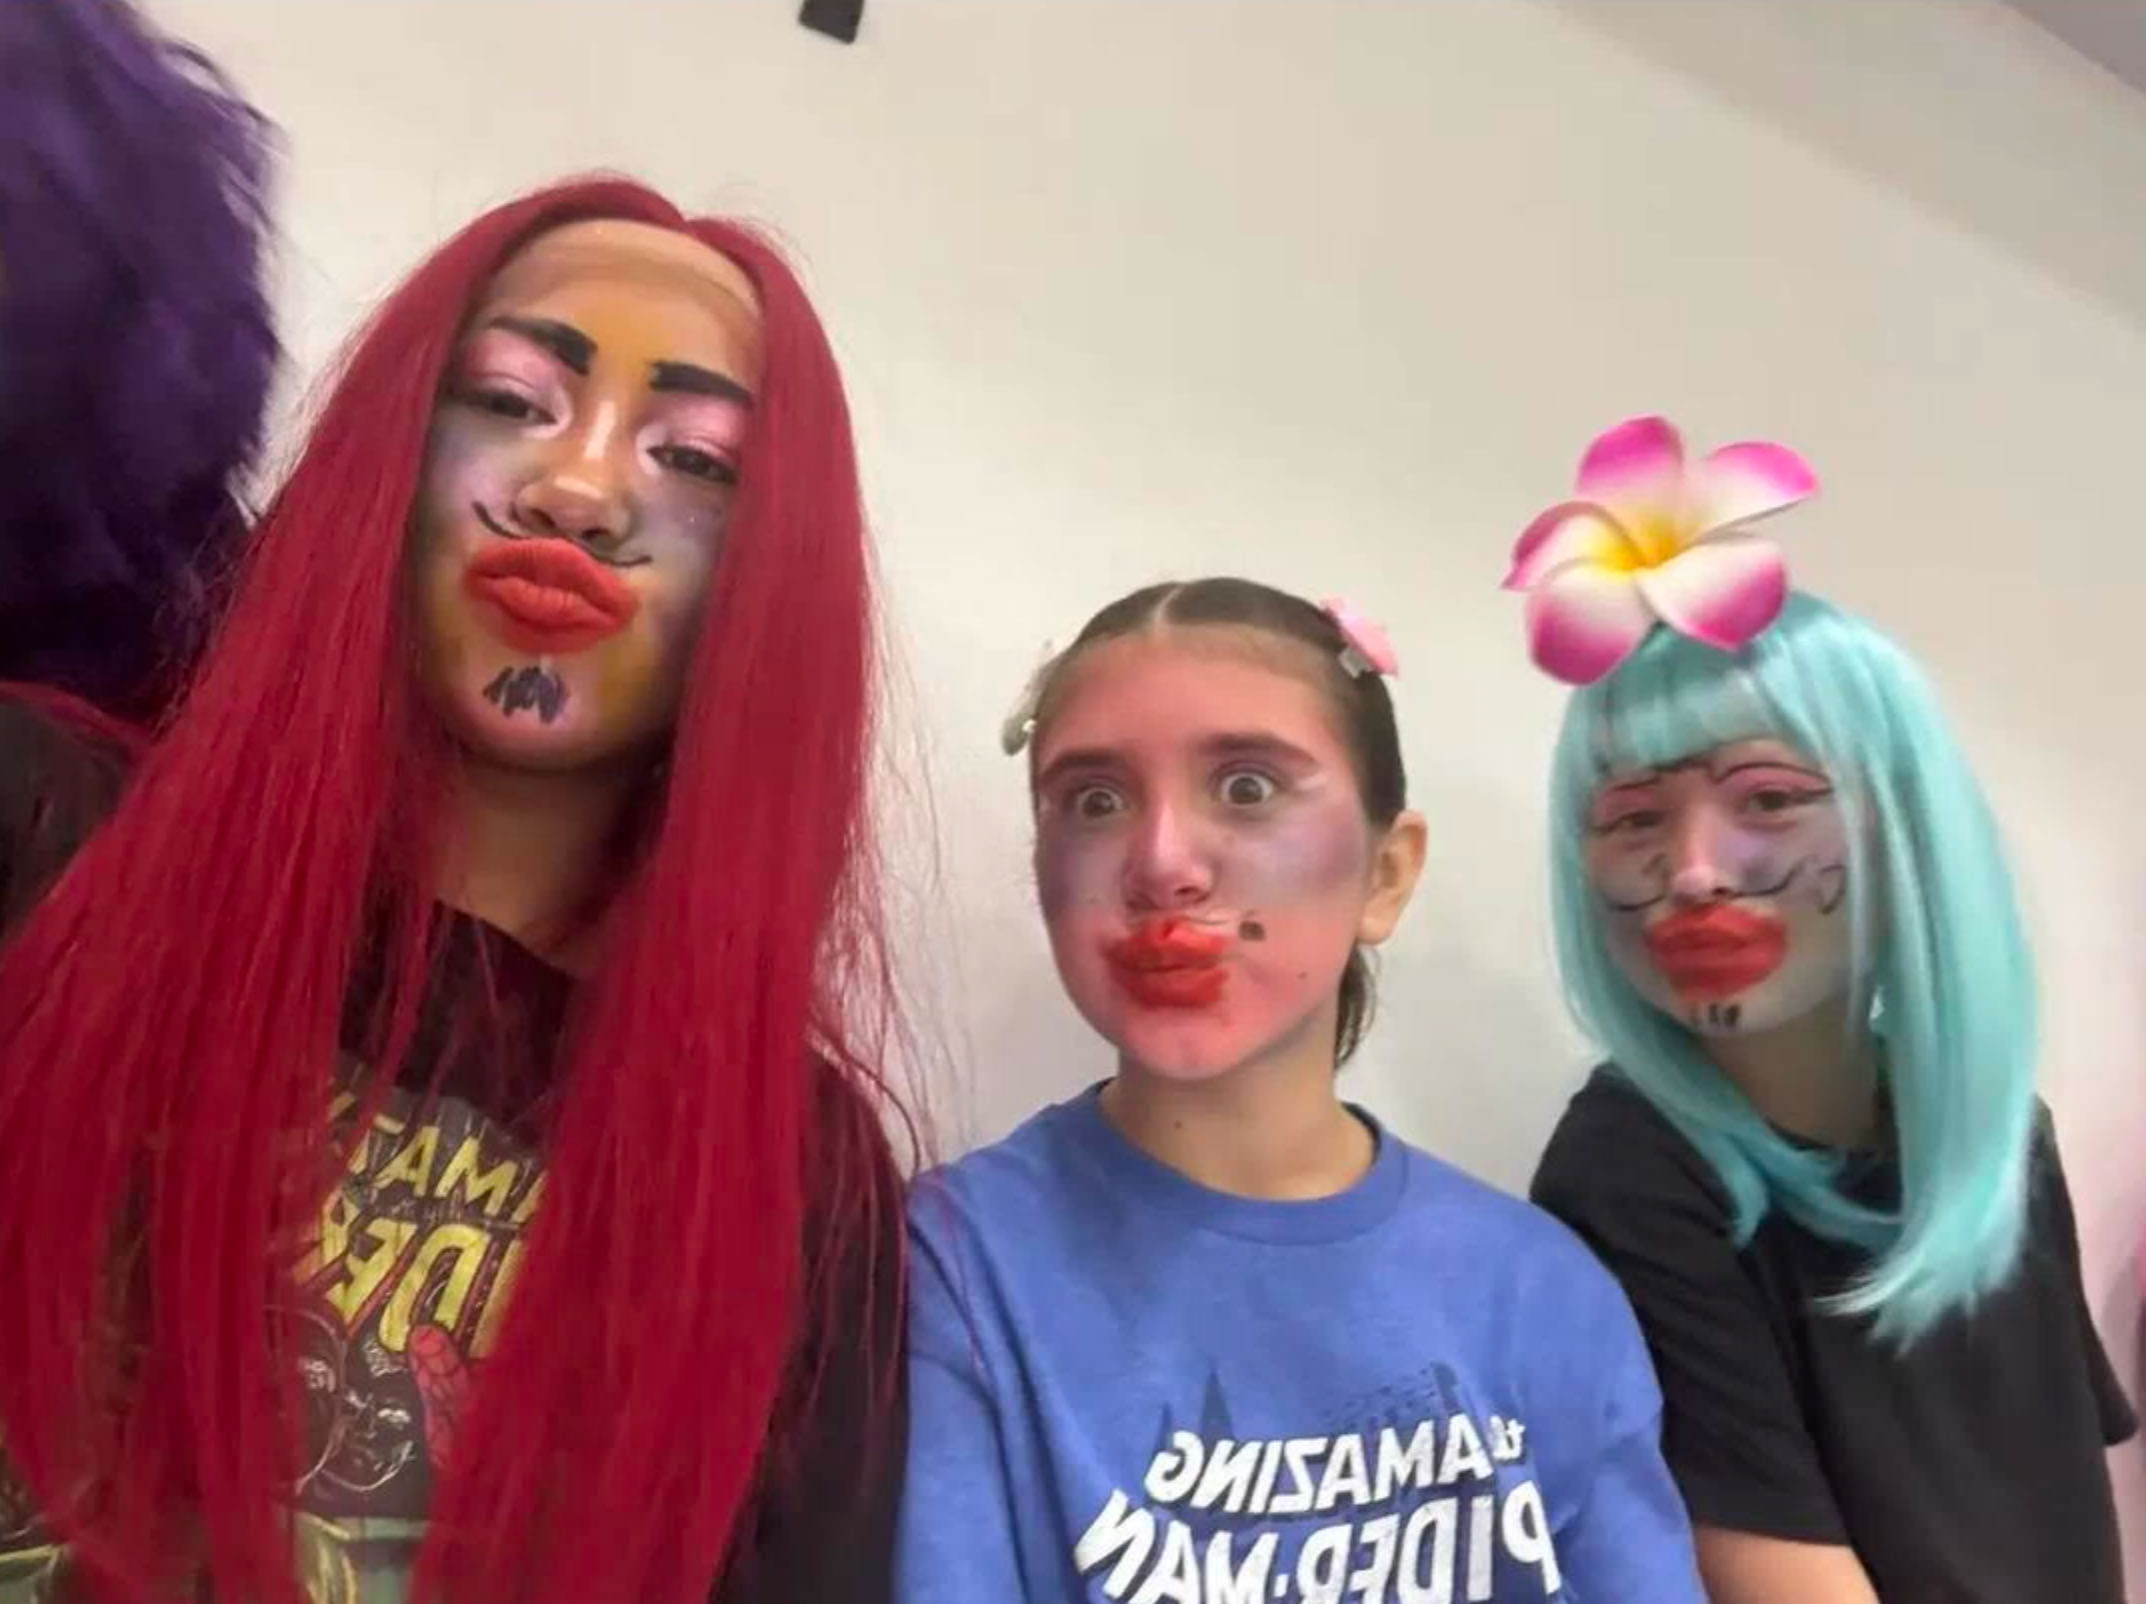 Penelope was recently seen in North's TikTok post, covered in face paint as they filmed their silly behavior